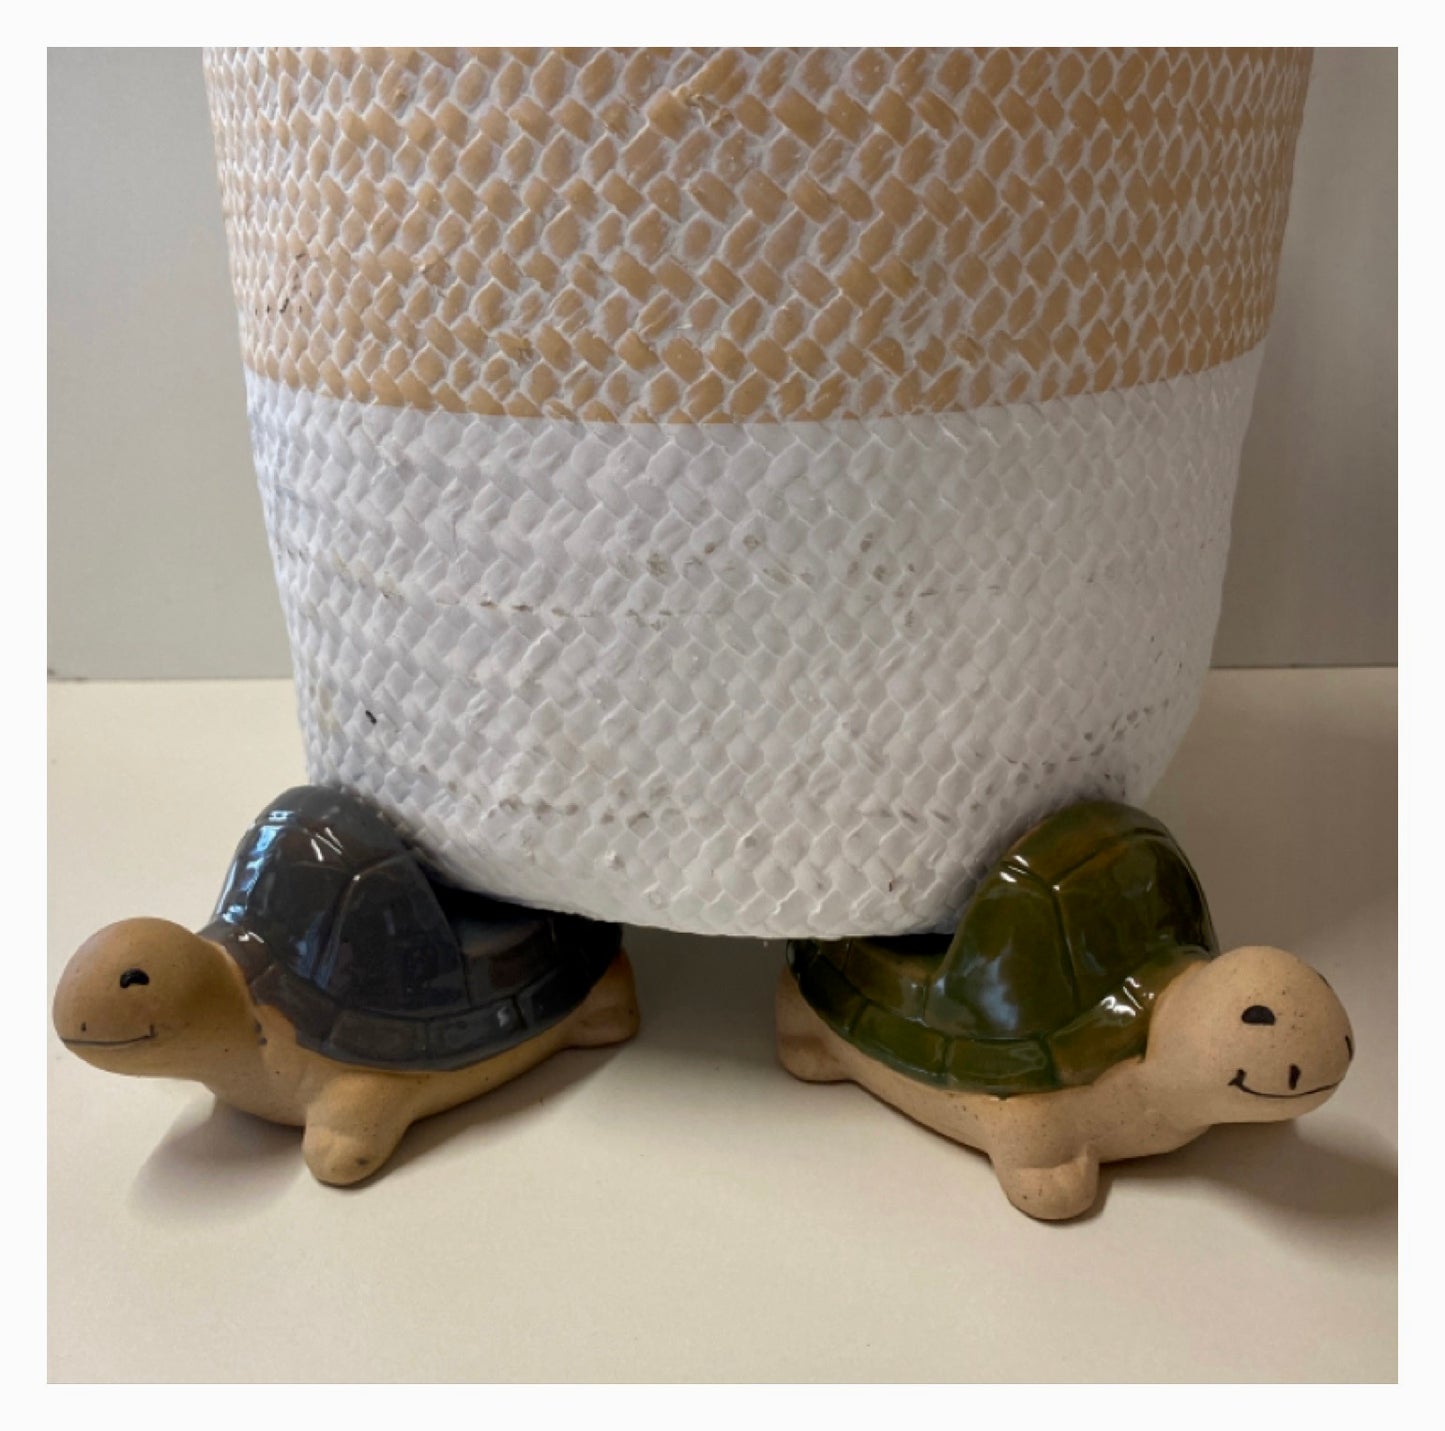 Pot Plant Feet Turtle Set of 3 Grey - The Renmy Store Homewares & Gifts 